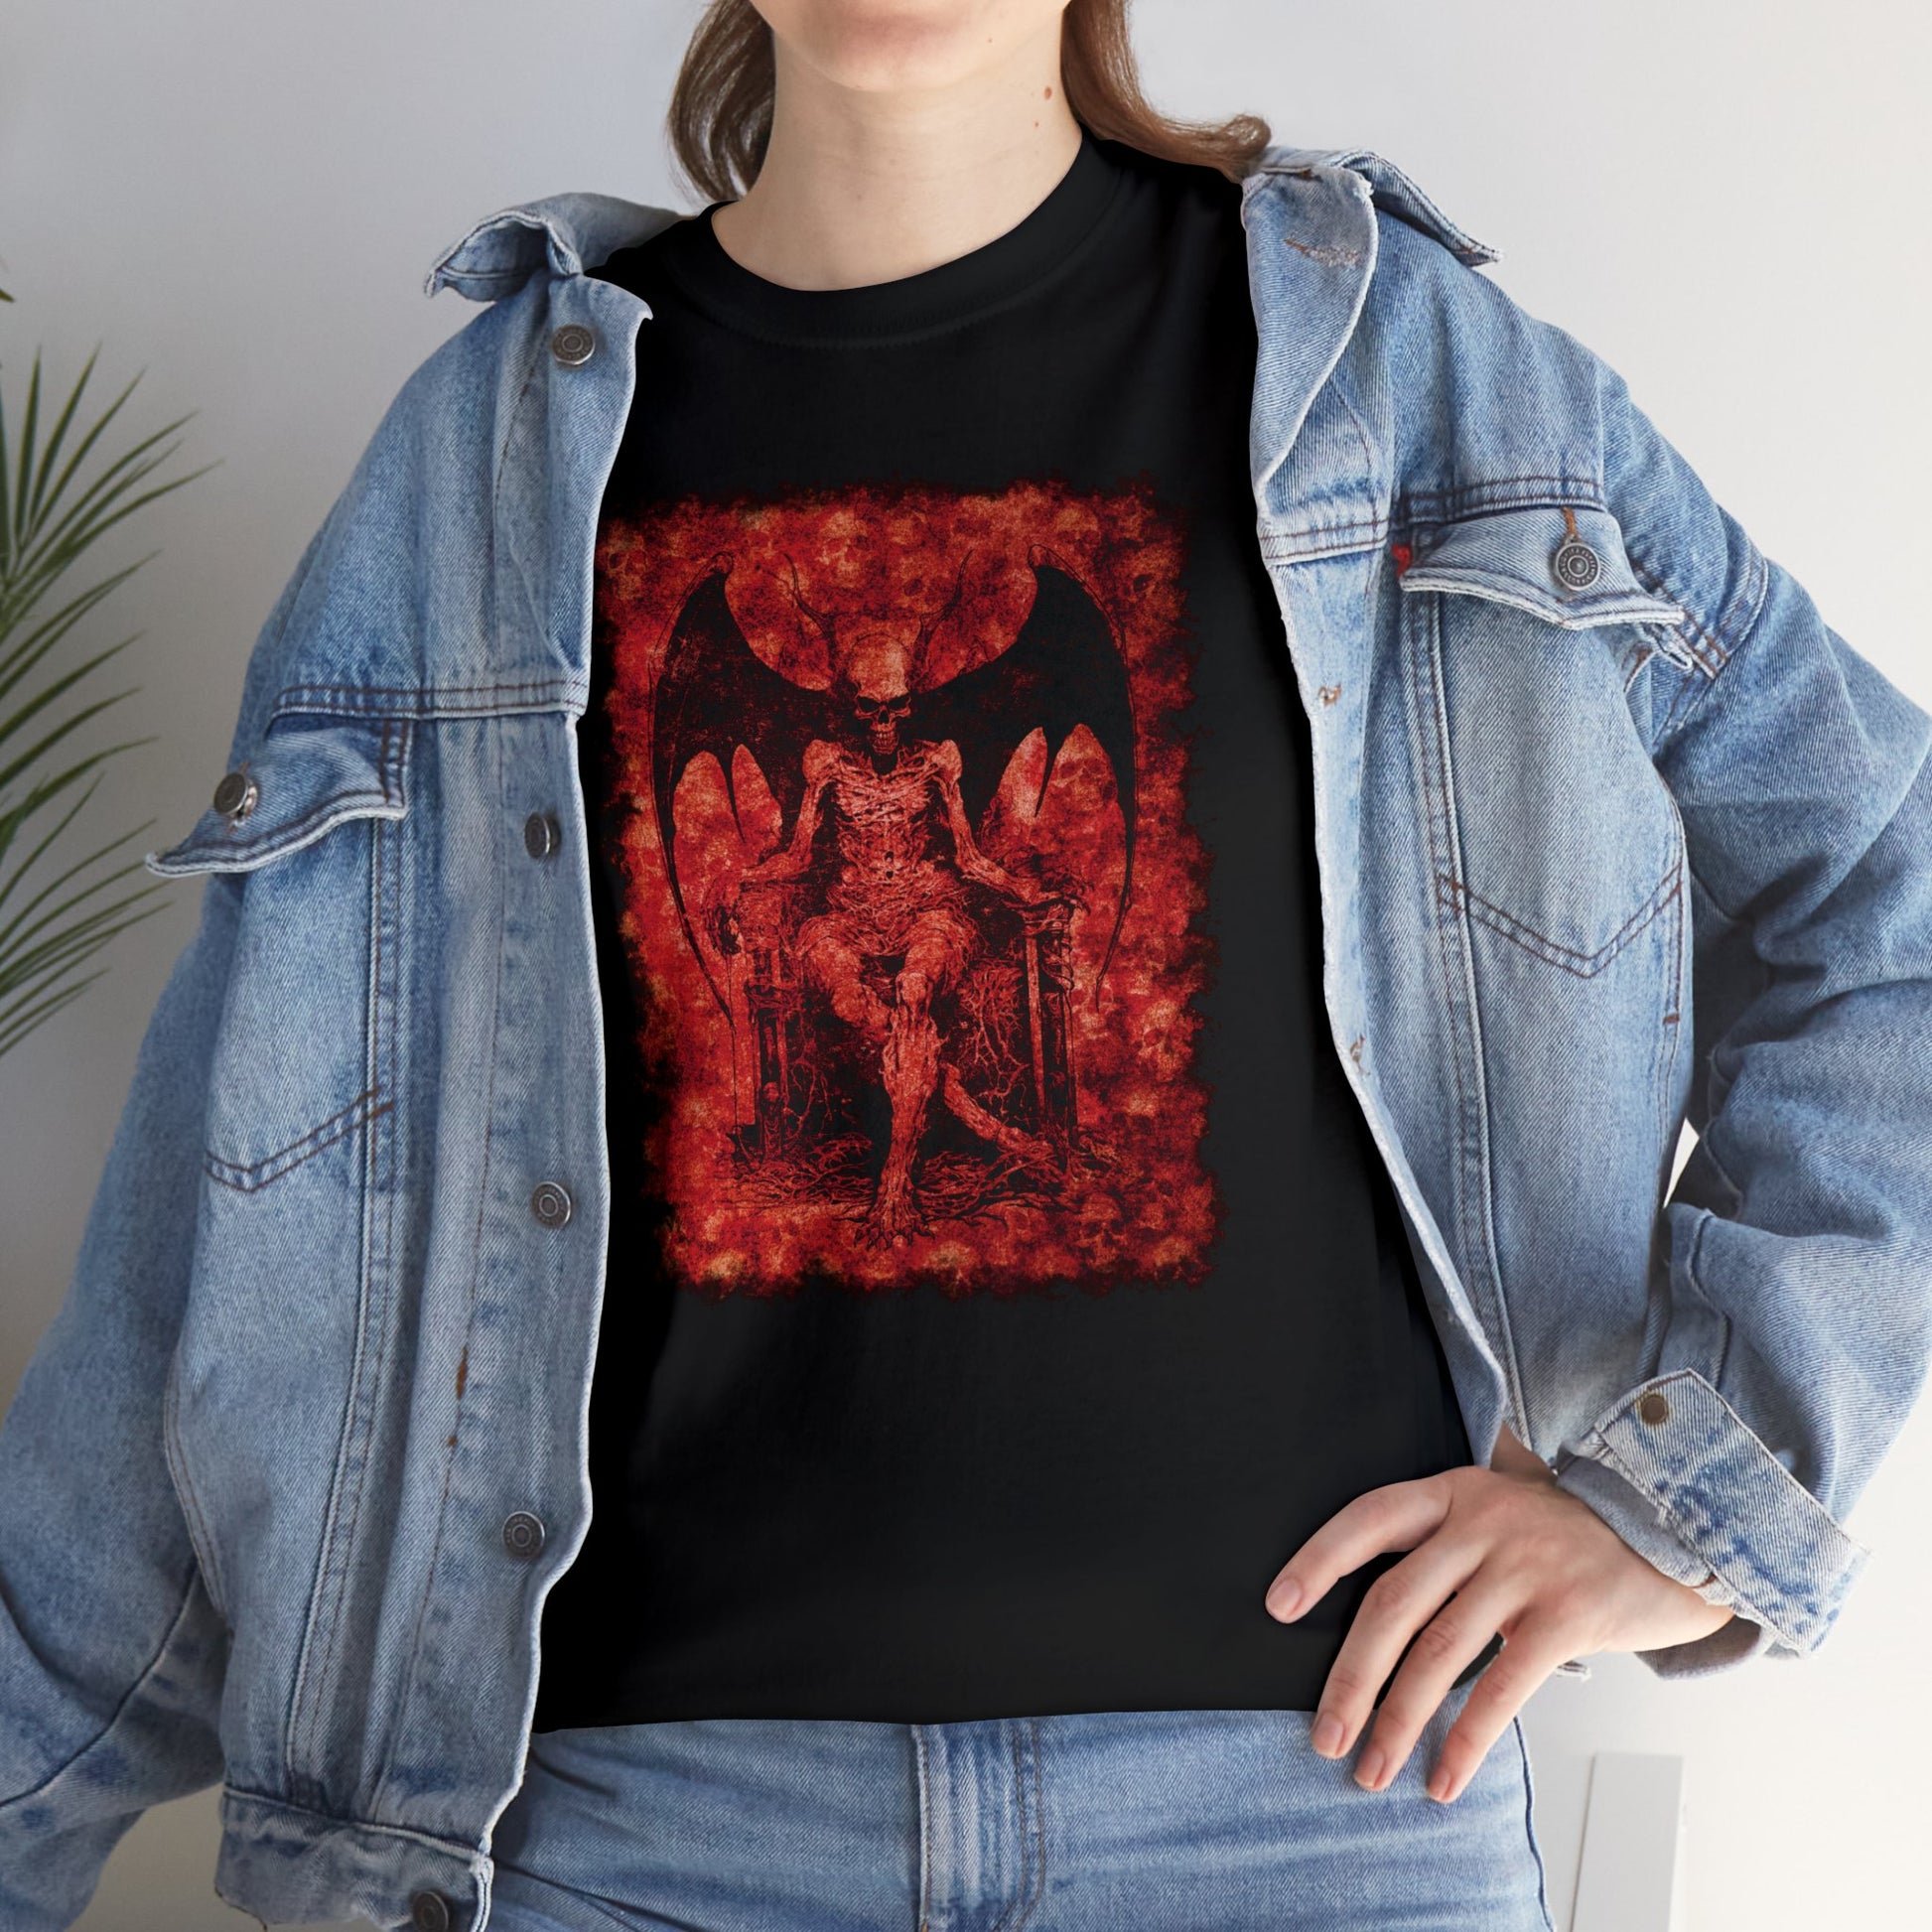 Unisex T-shirt Devil on his Throne in Red Square - Frogos Design